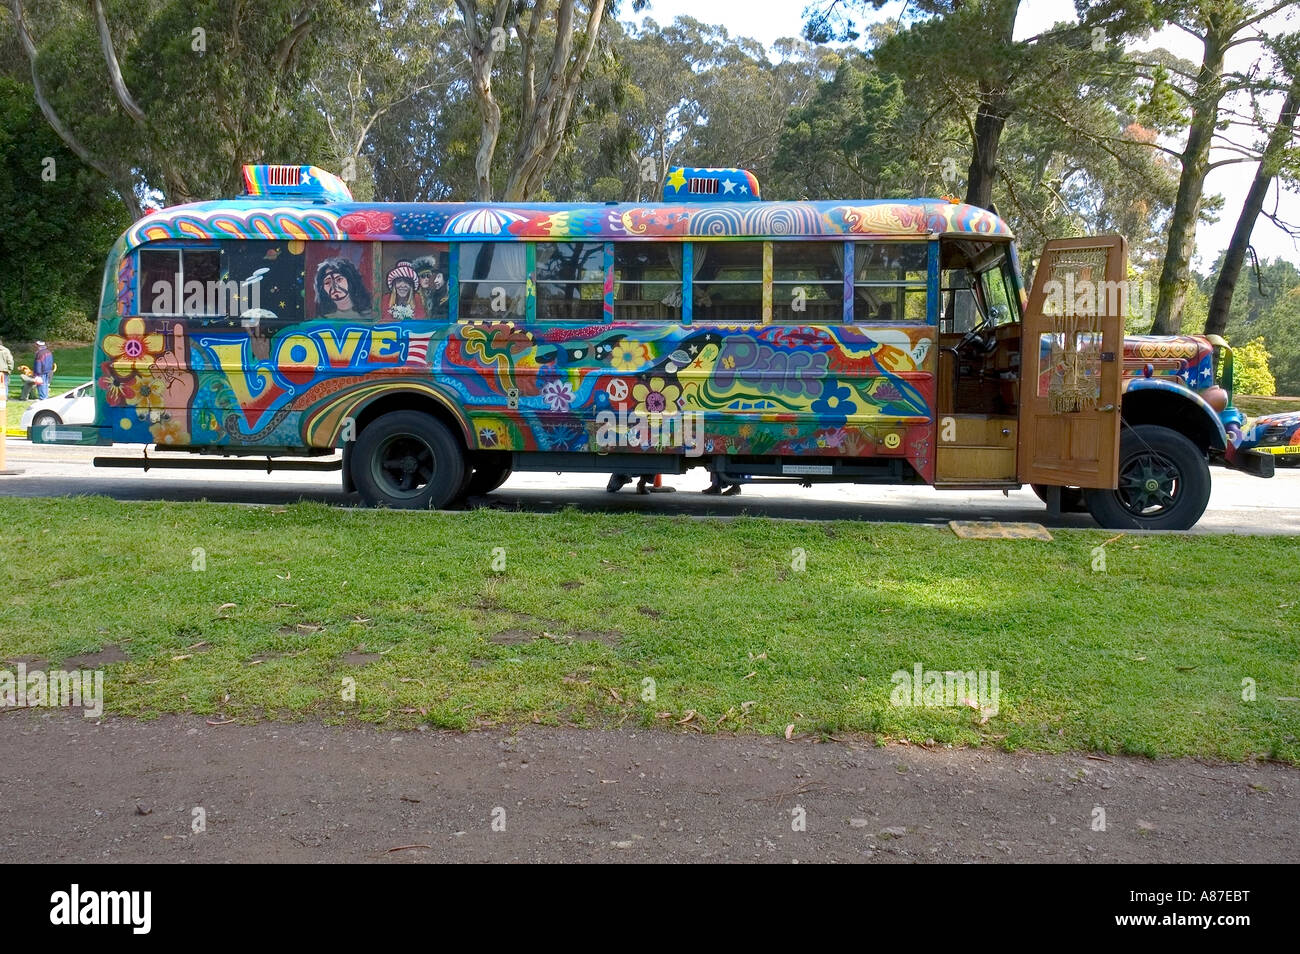 Hippie bus painted in wild psychedelic colors Stock Photo